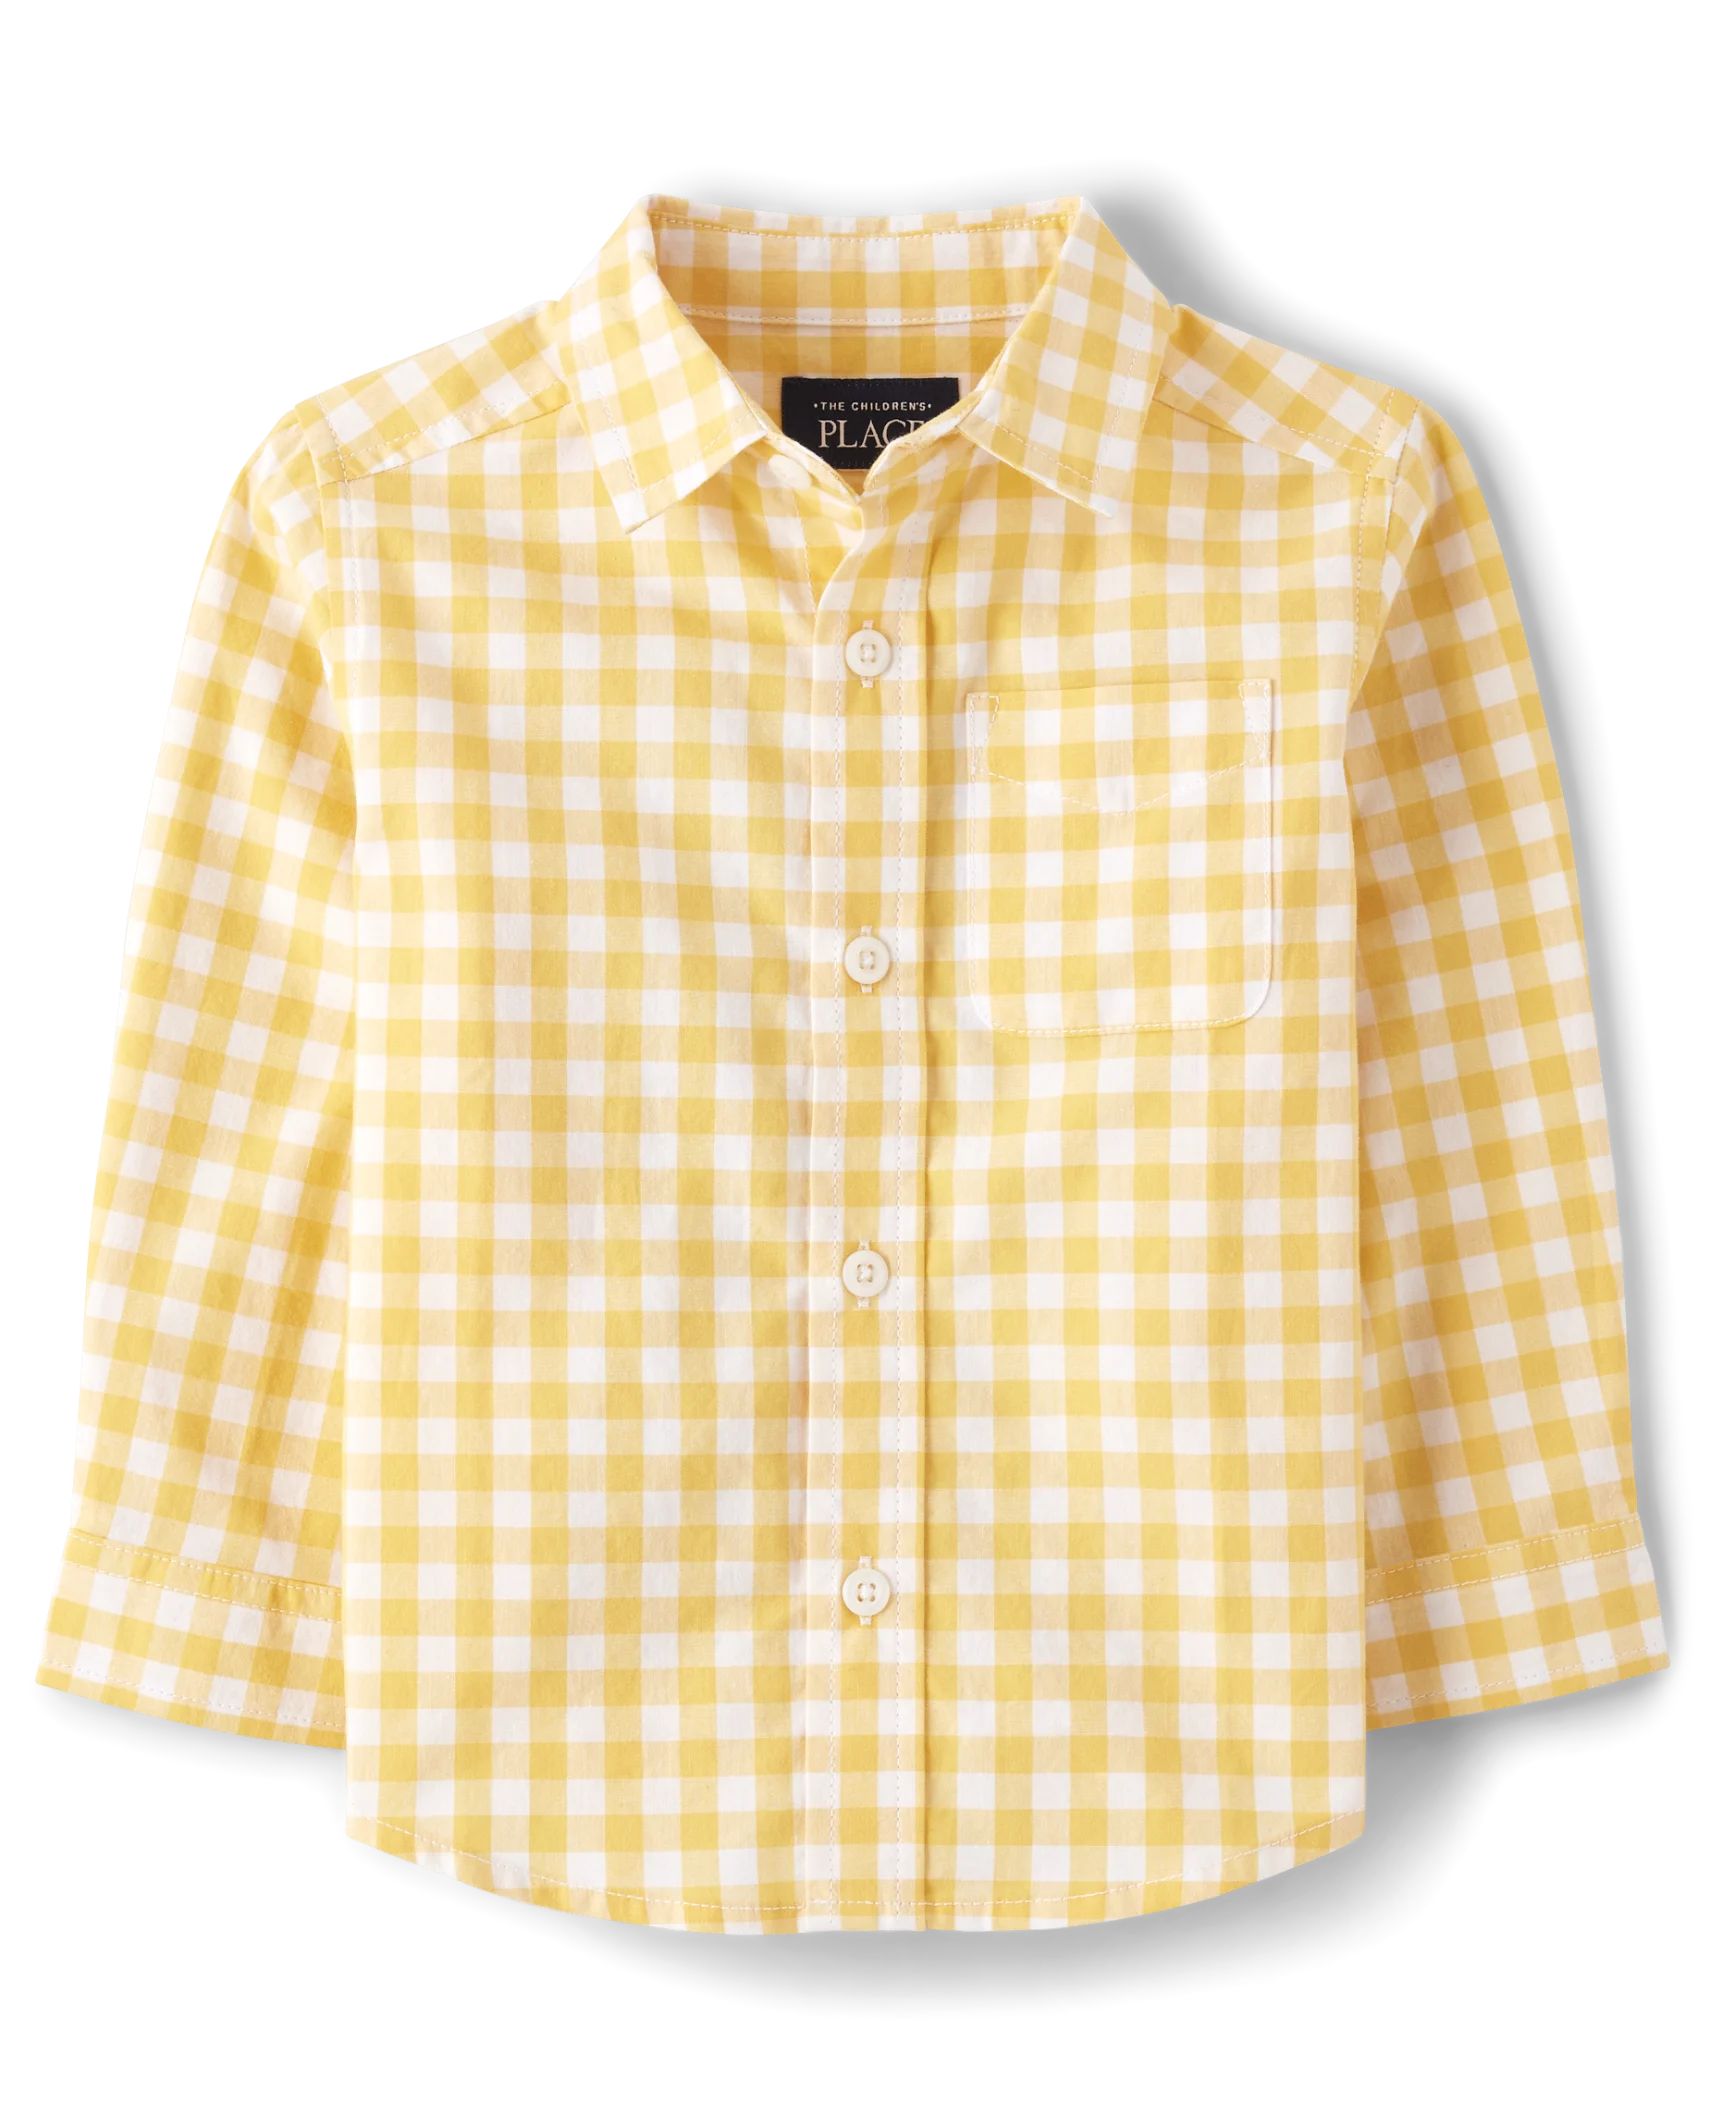 Baby And Toddler Boys Gingham Poplin Button Up Shirt - sunset gold | The Children's Place